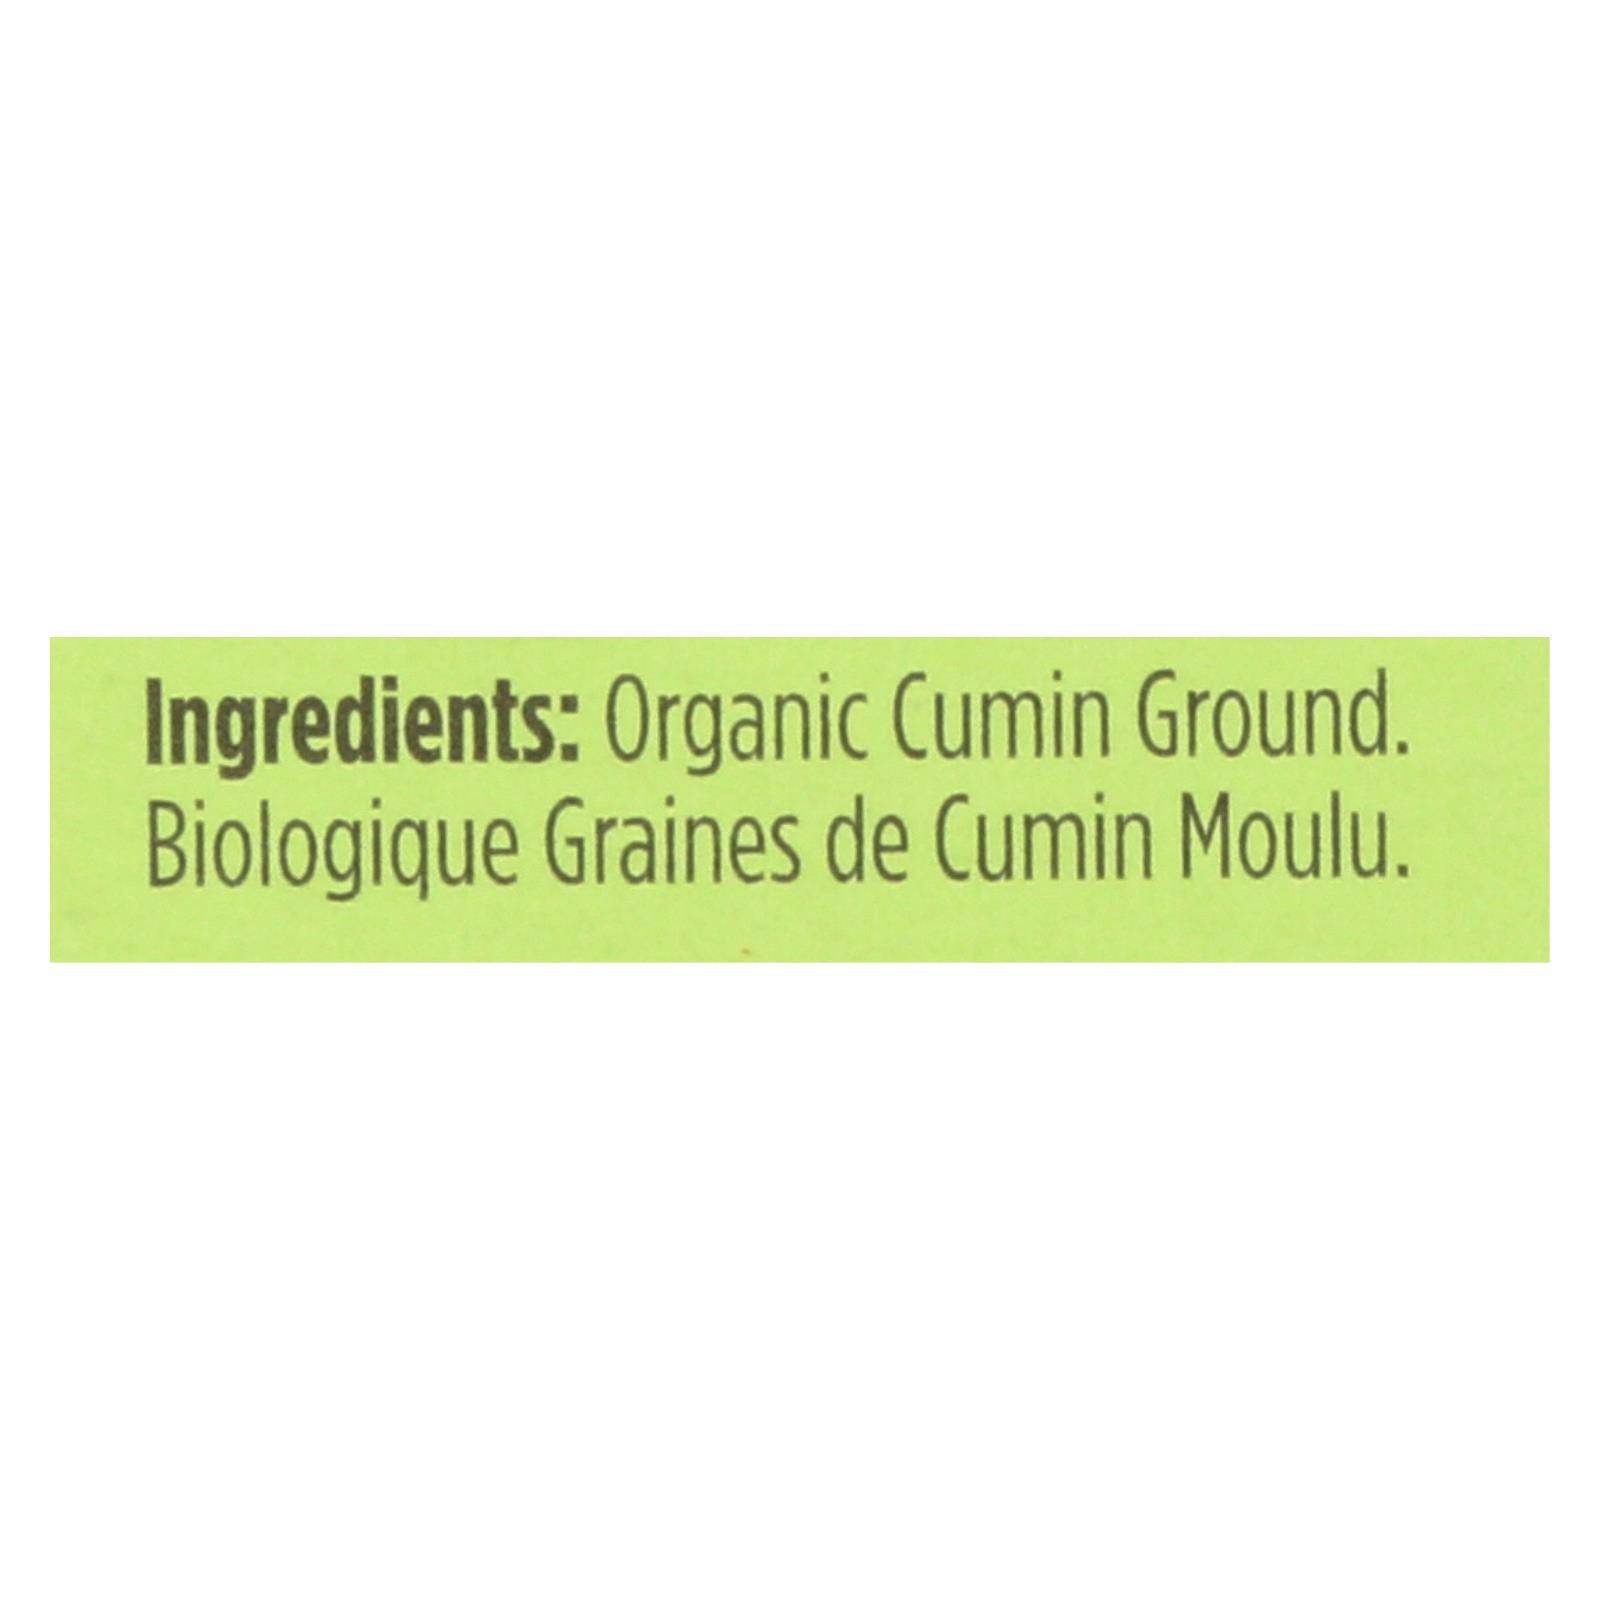 Buy Spicely Organics - Organic Cumin - Ground - Case Of 6 - 0.45 Oz.  at OnlyNaturals.us